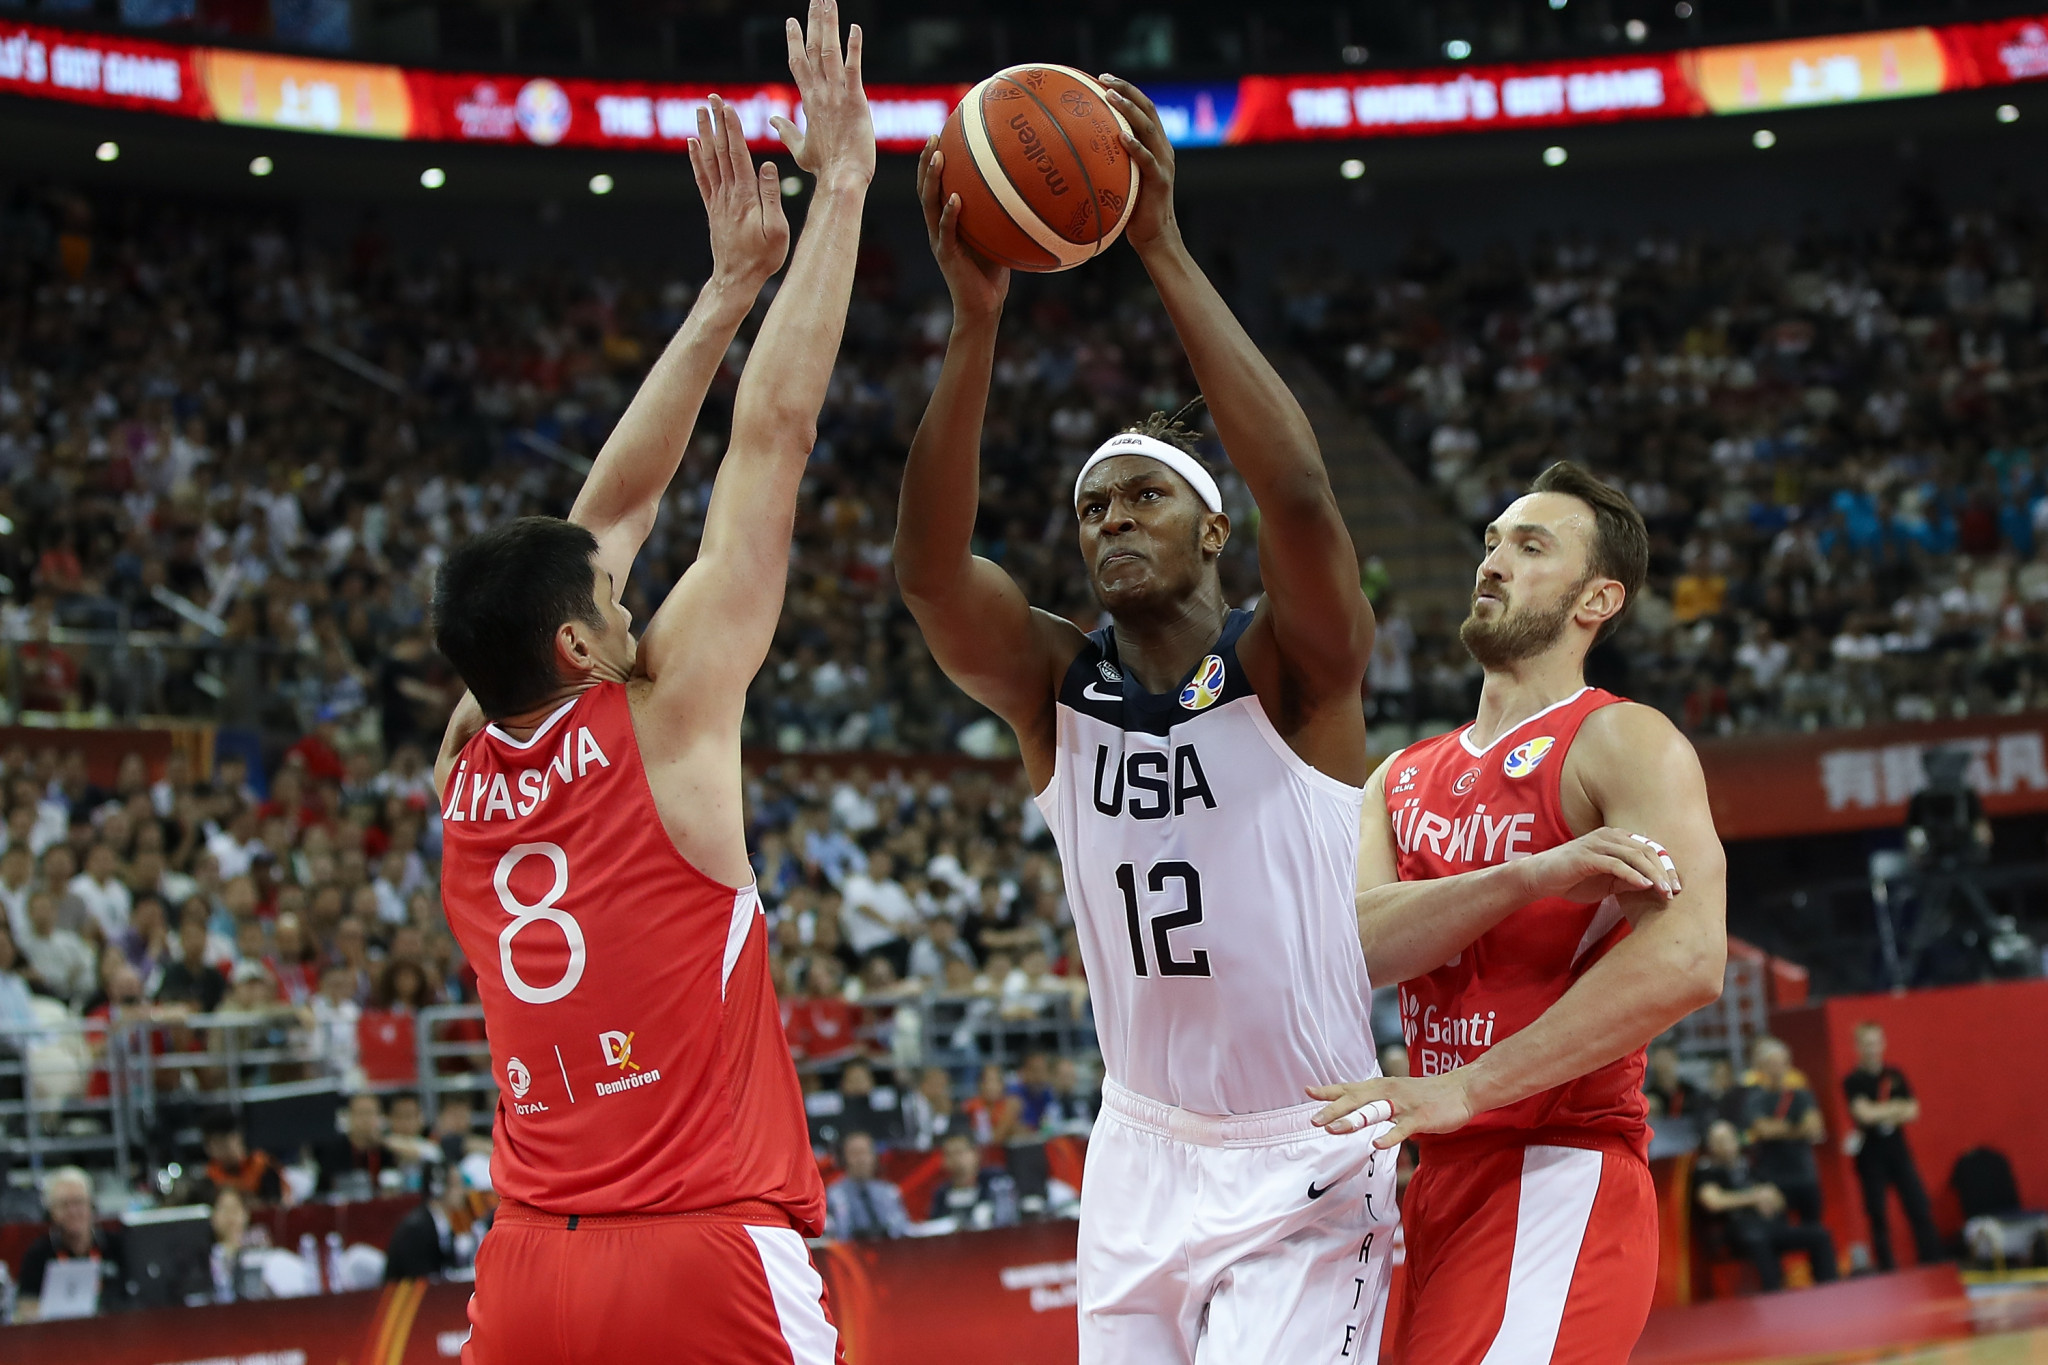 Holders United States edge Turkey in thriller at FIBA World Cup